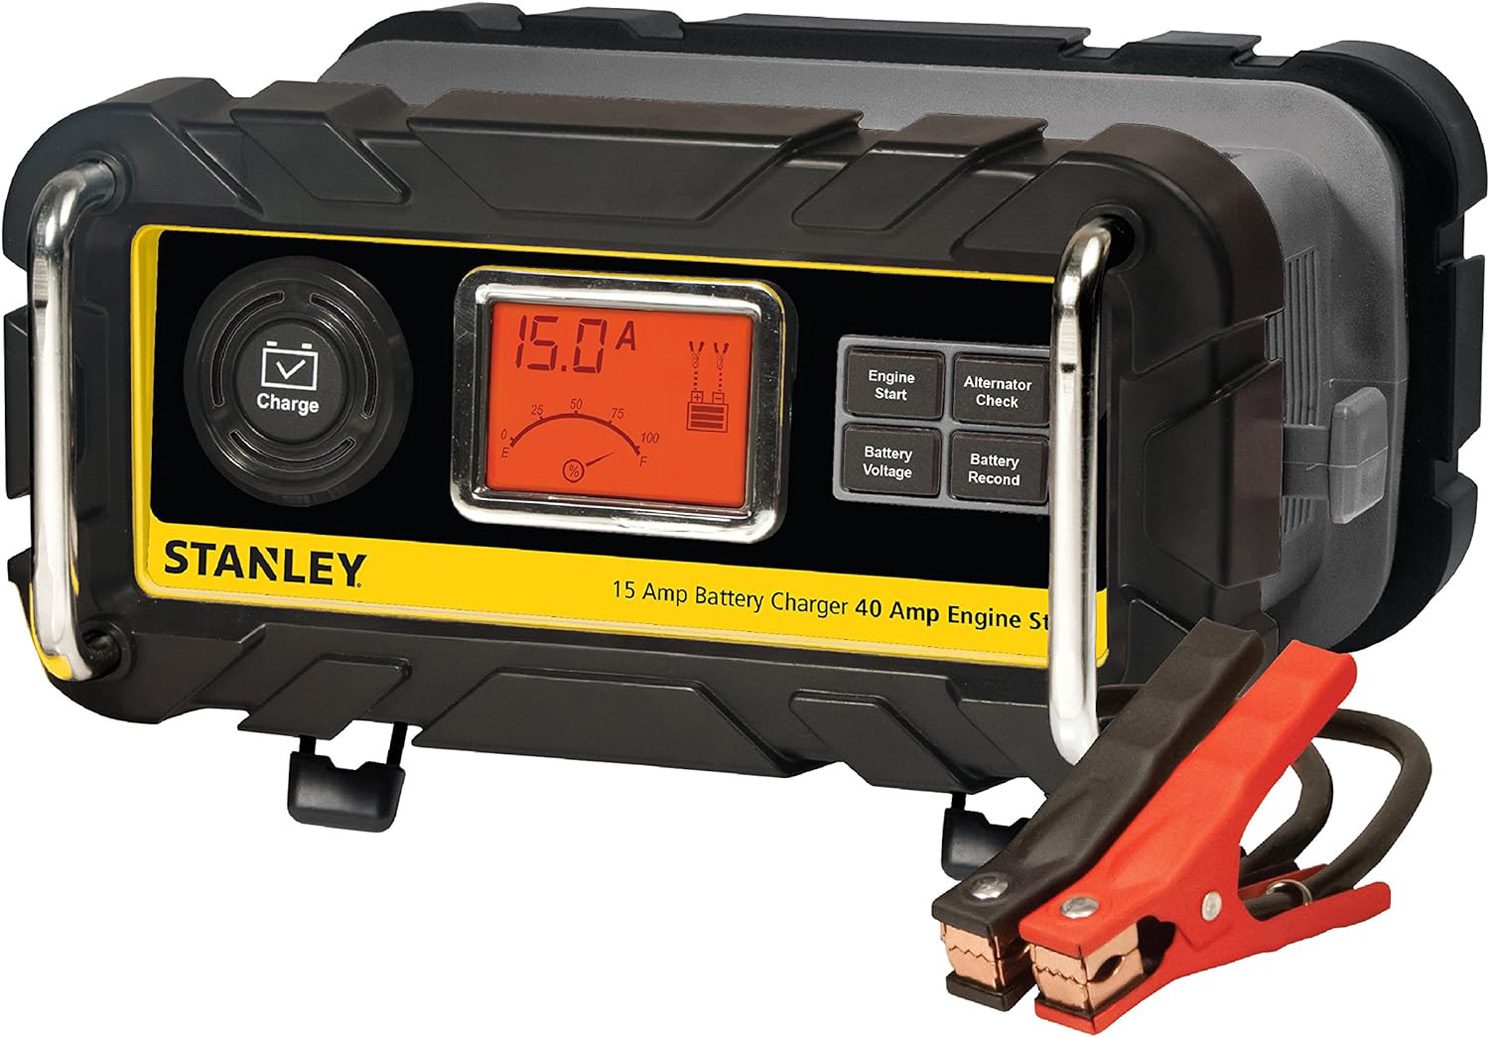 STANLEY BC15BS Fully Automatic 15 Amp 12V Bench Battery Charger/Maintainer with 40A Engine Start, Alternator Check, Cable Clamps